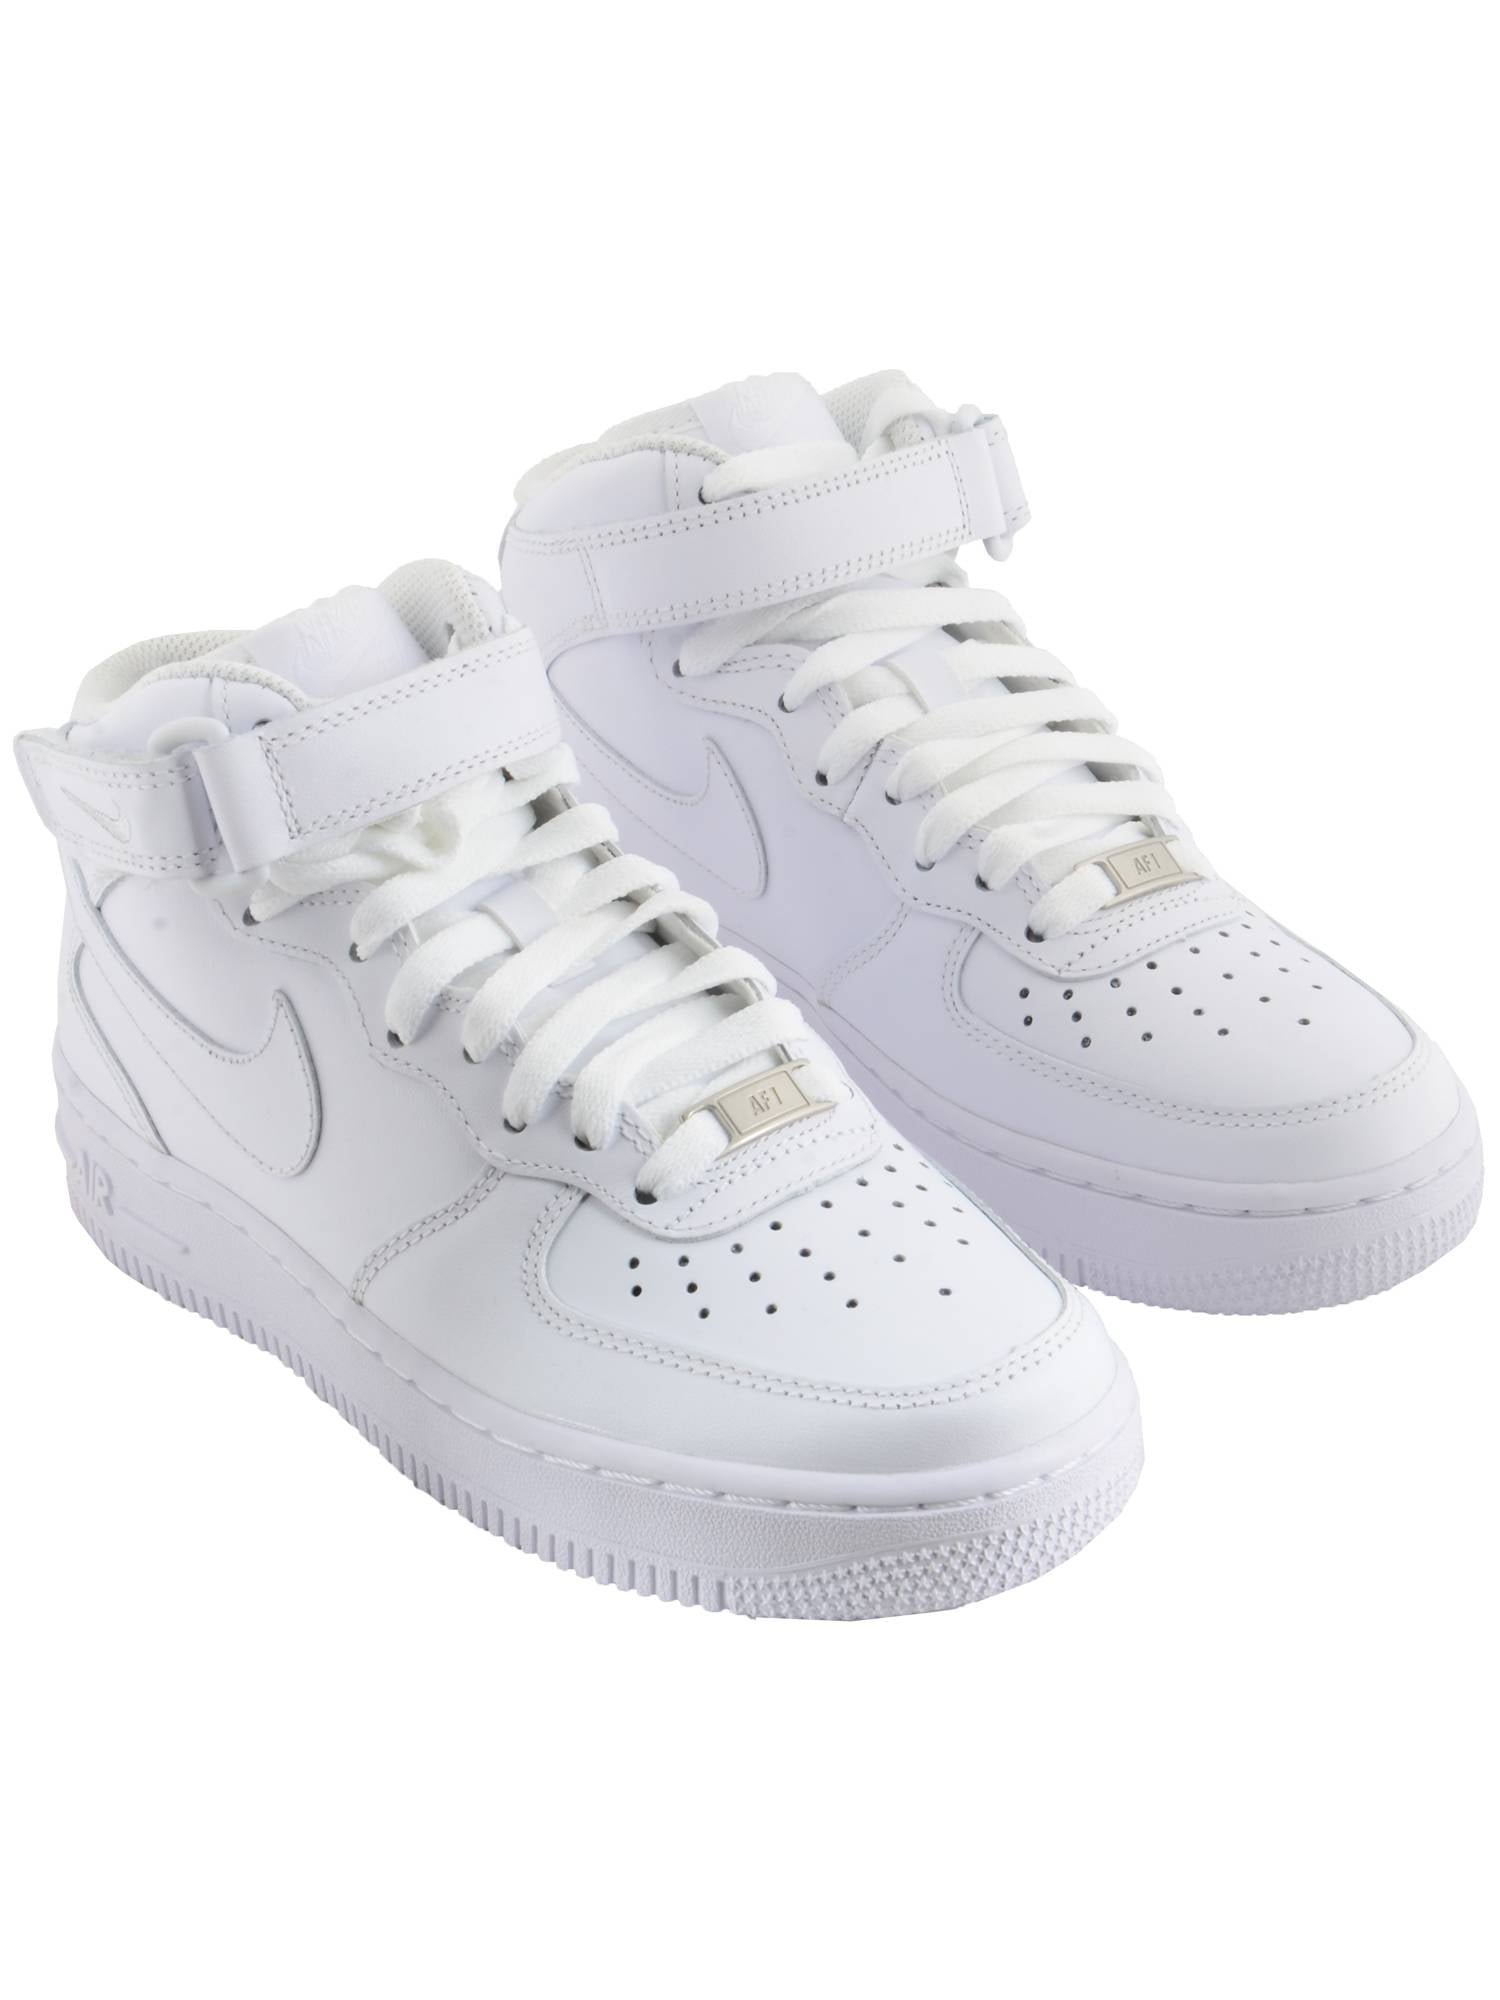 nike air force 1 high laces